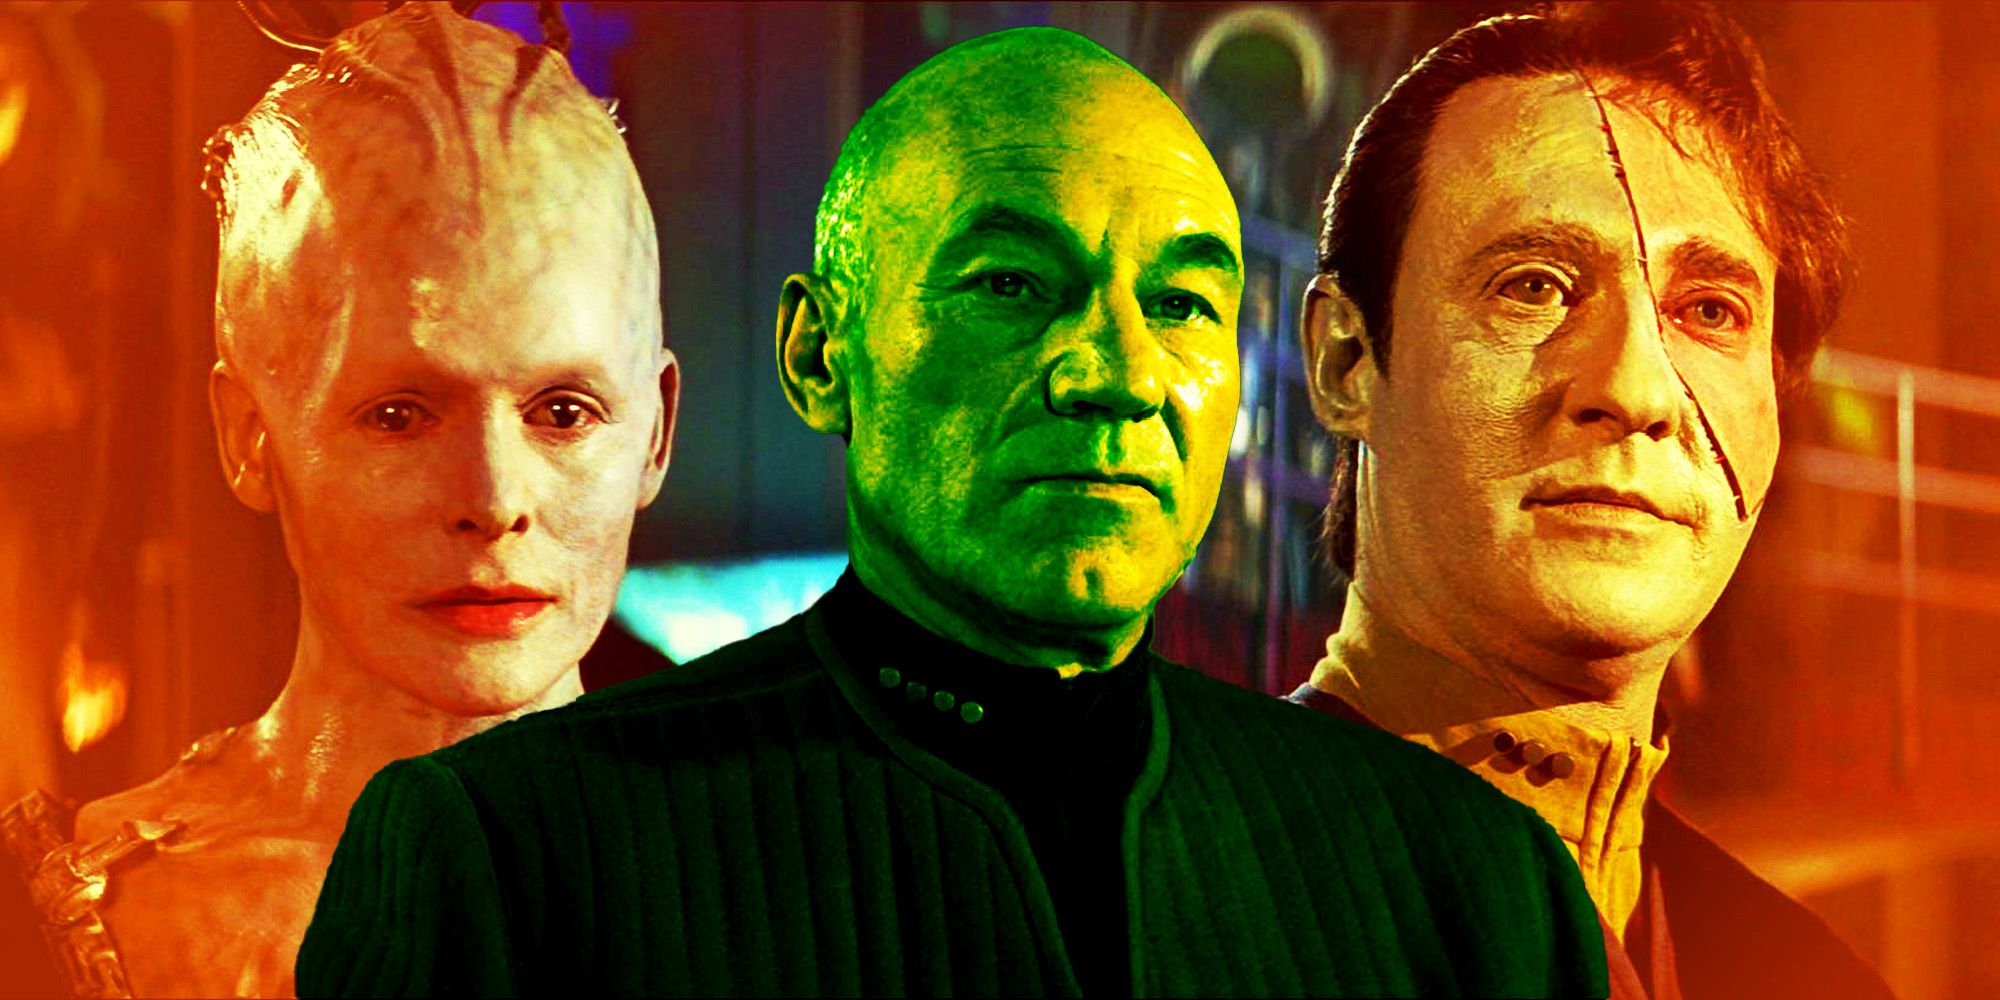 Forget Picard’s Family Death & Make Jean-Luc More “Heroic” In Star Trek: First Contact, Said Patrick Stewart